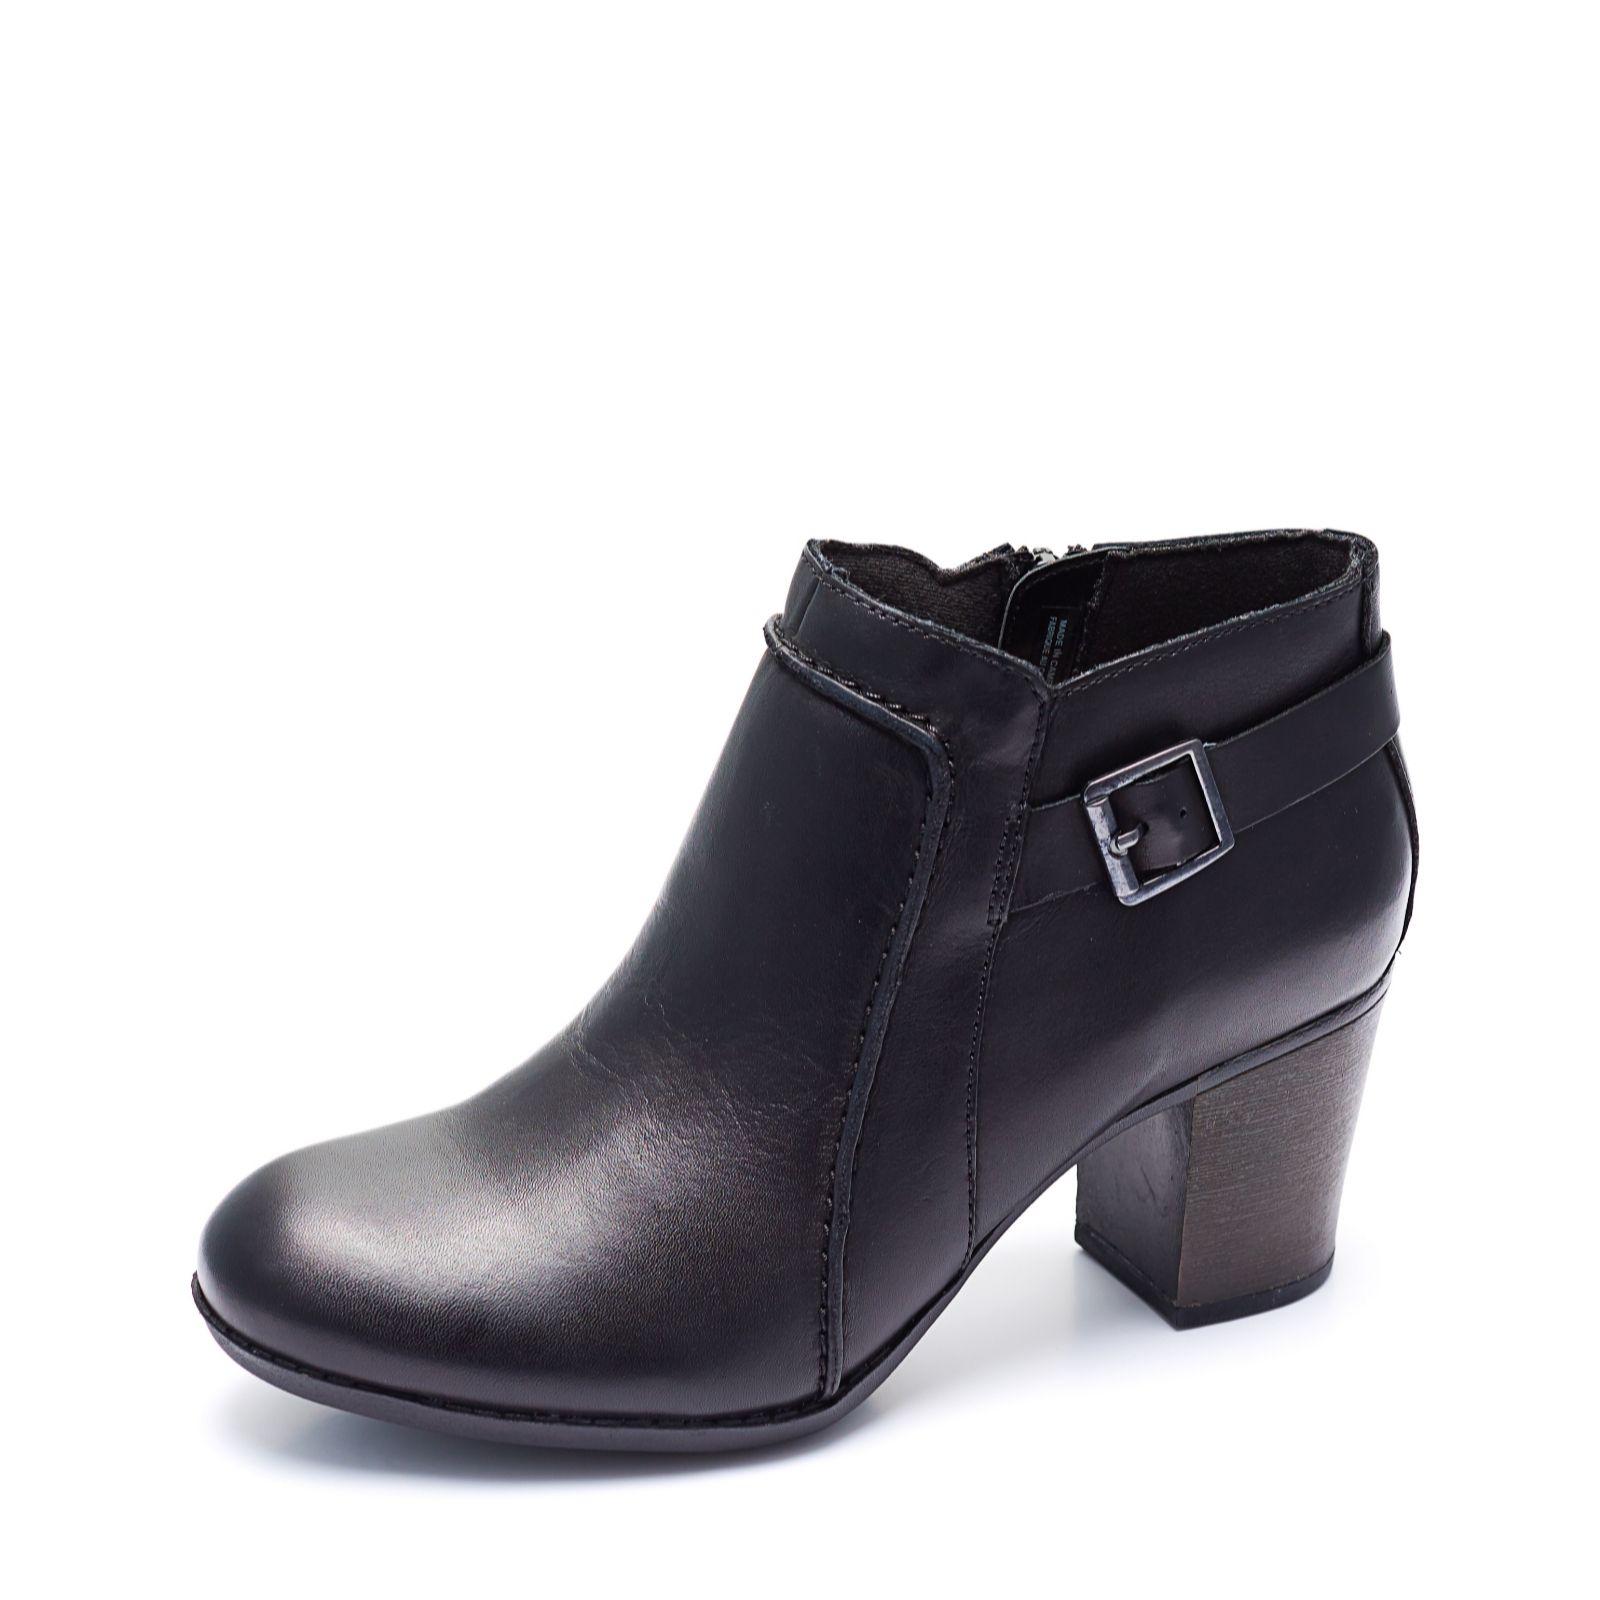 Clarks Enfield Kayla Buckle Ankle Boot 